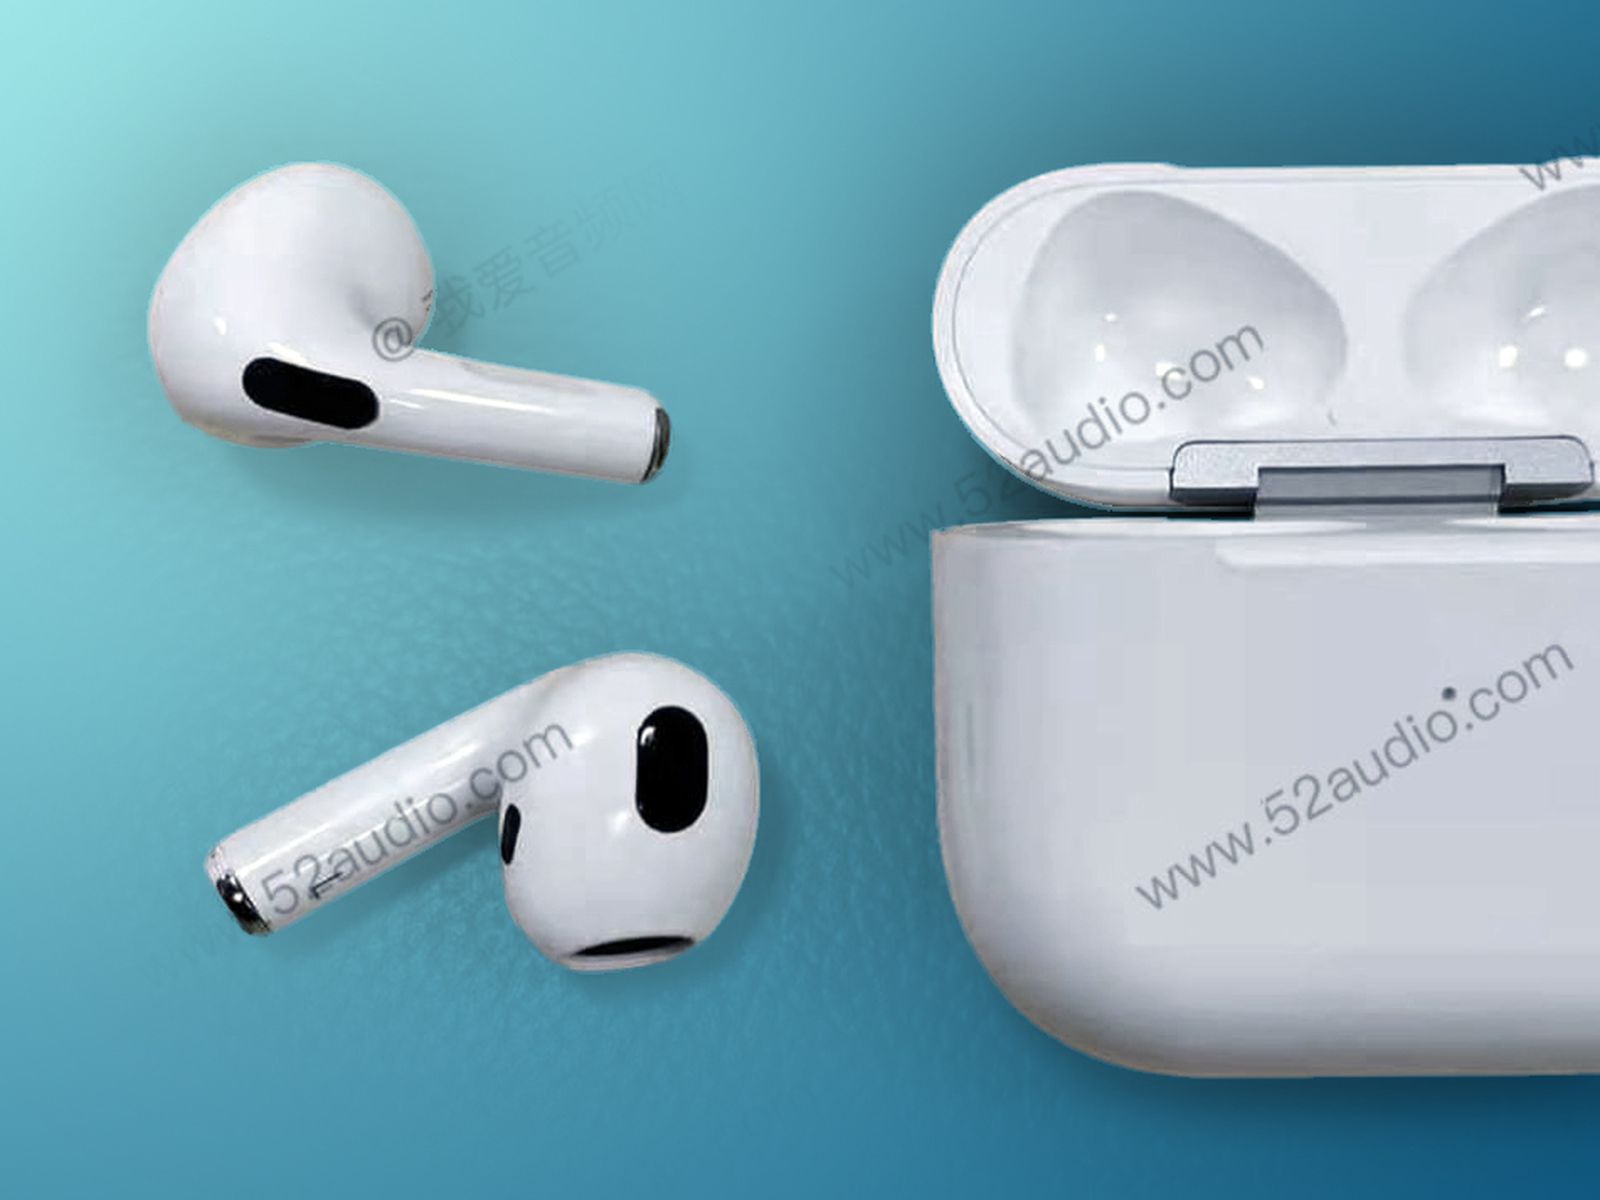 AirPods 3 Case Appears on , Suggests Major Redesign